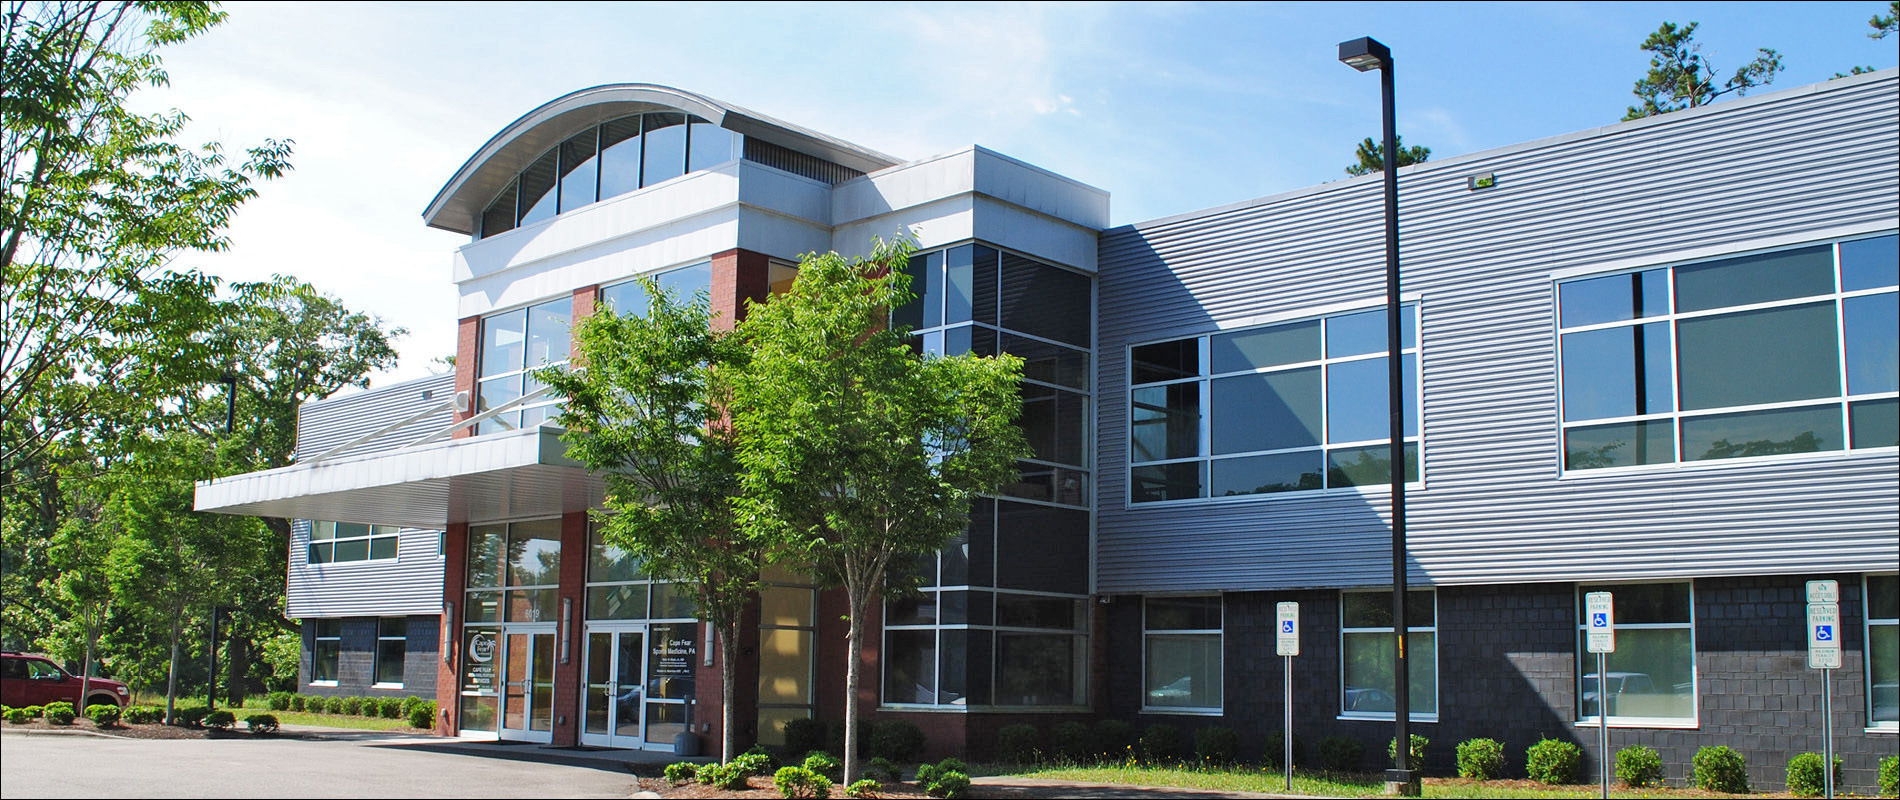 Exterior photo of the Cape Fear Sports Medicine building during the daytime